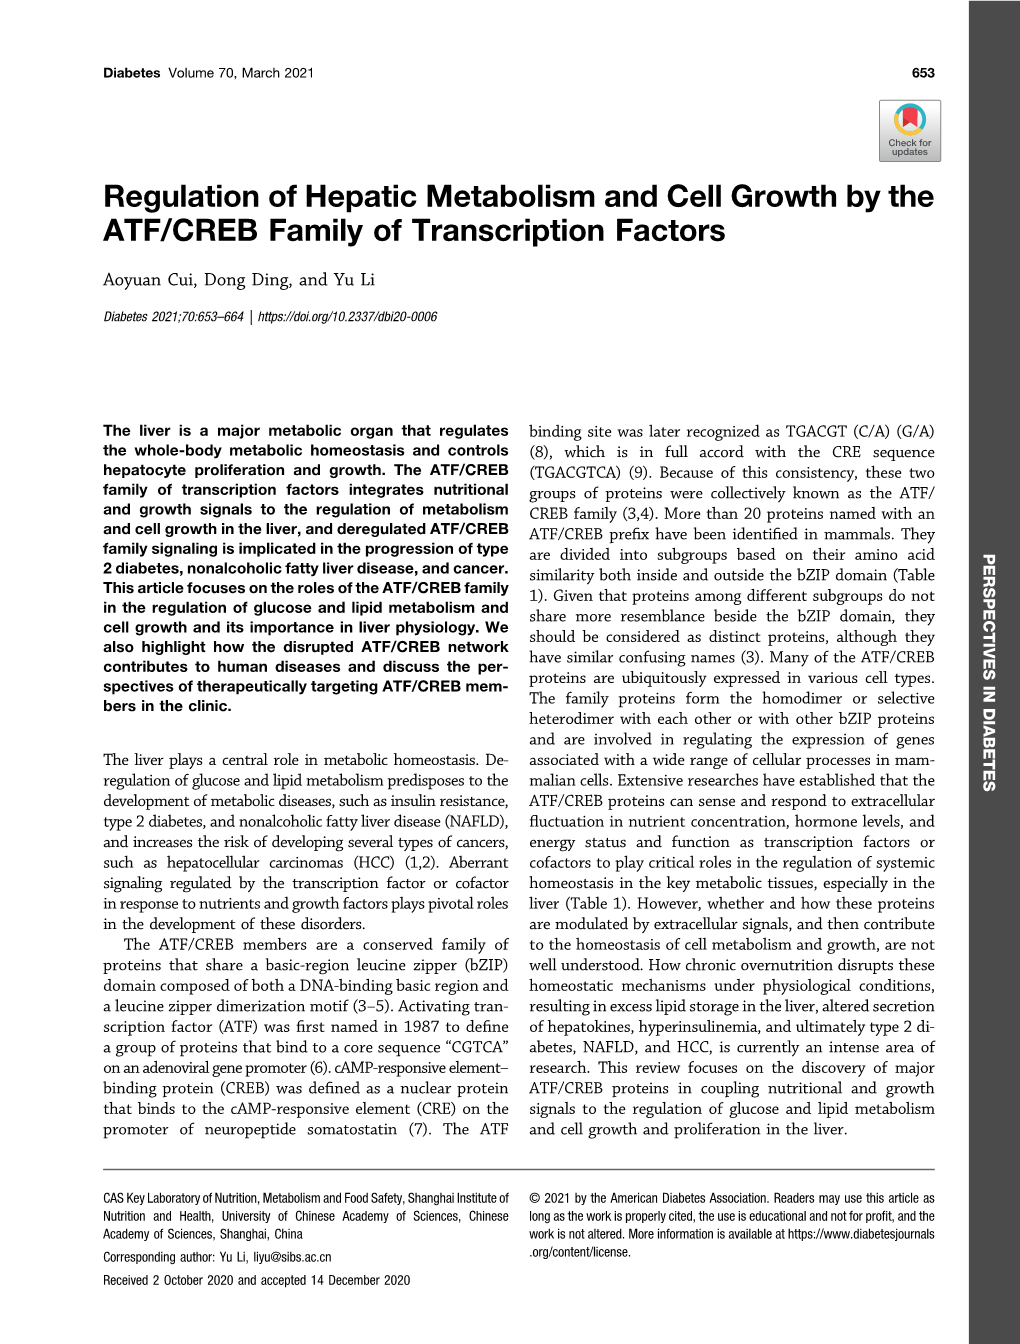 Regulation of Hepatic Metabolism and Cell Growth by the ATF/CREB Family of Transcription Factors